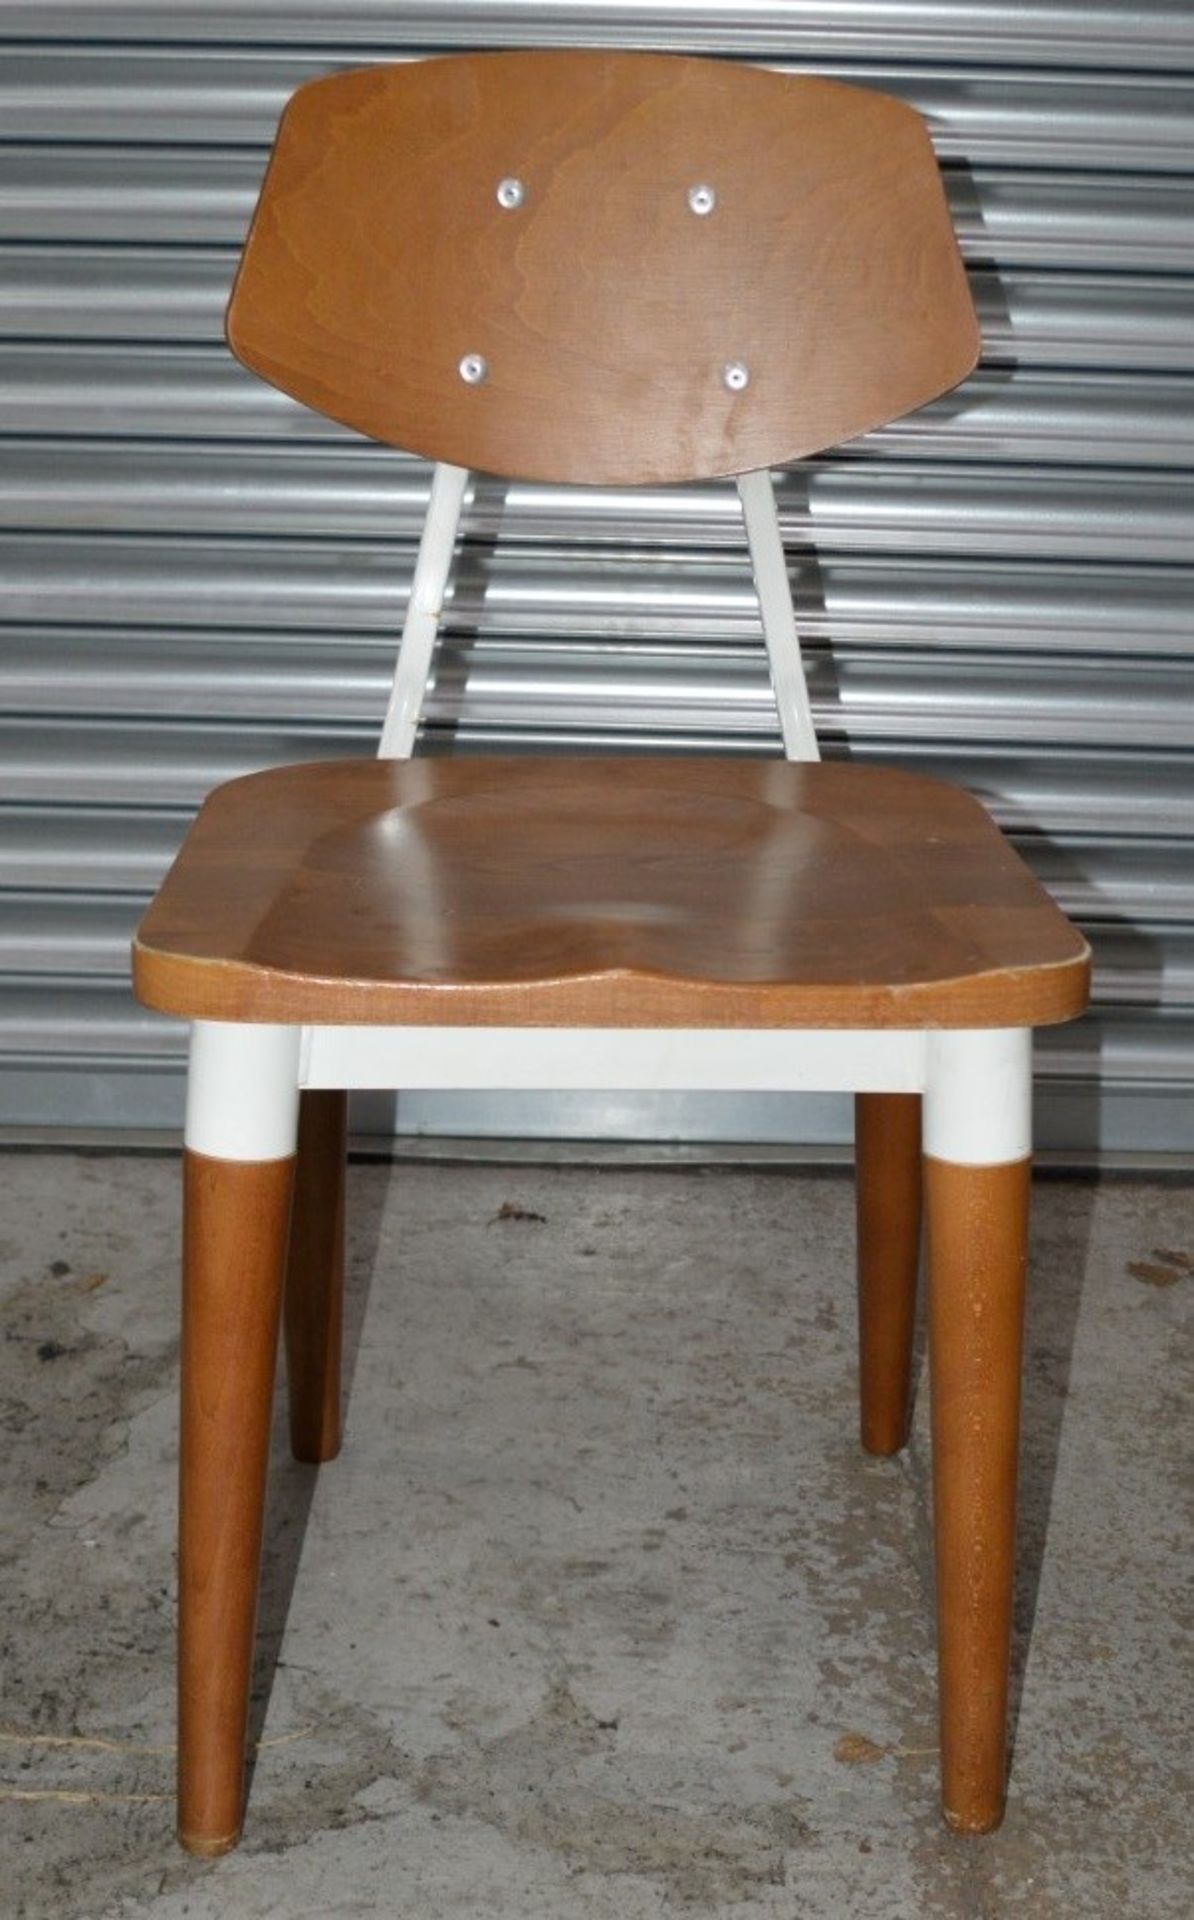 8 x Contemporary Commercial Dining Chairs With A Sturdy Wood And Metal Construction - Image 7 of 10